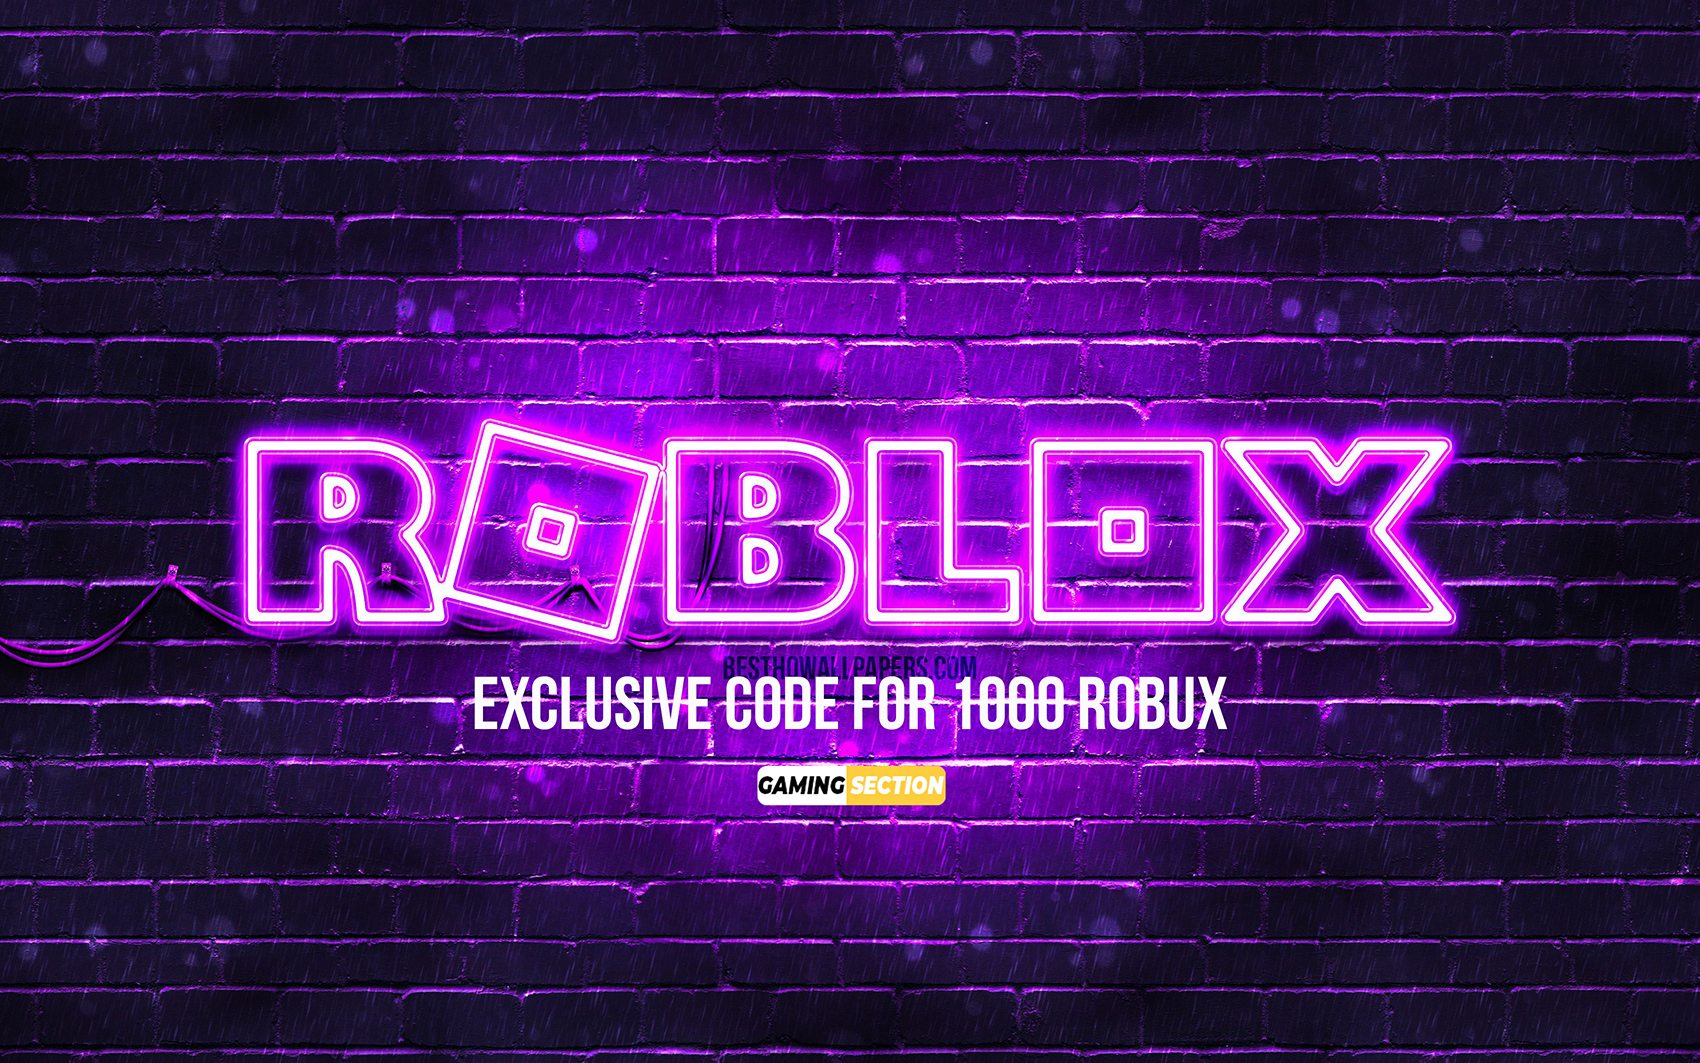 What’s the code for 1000 Robux? Gaming Section Magazine Gaming, E